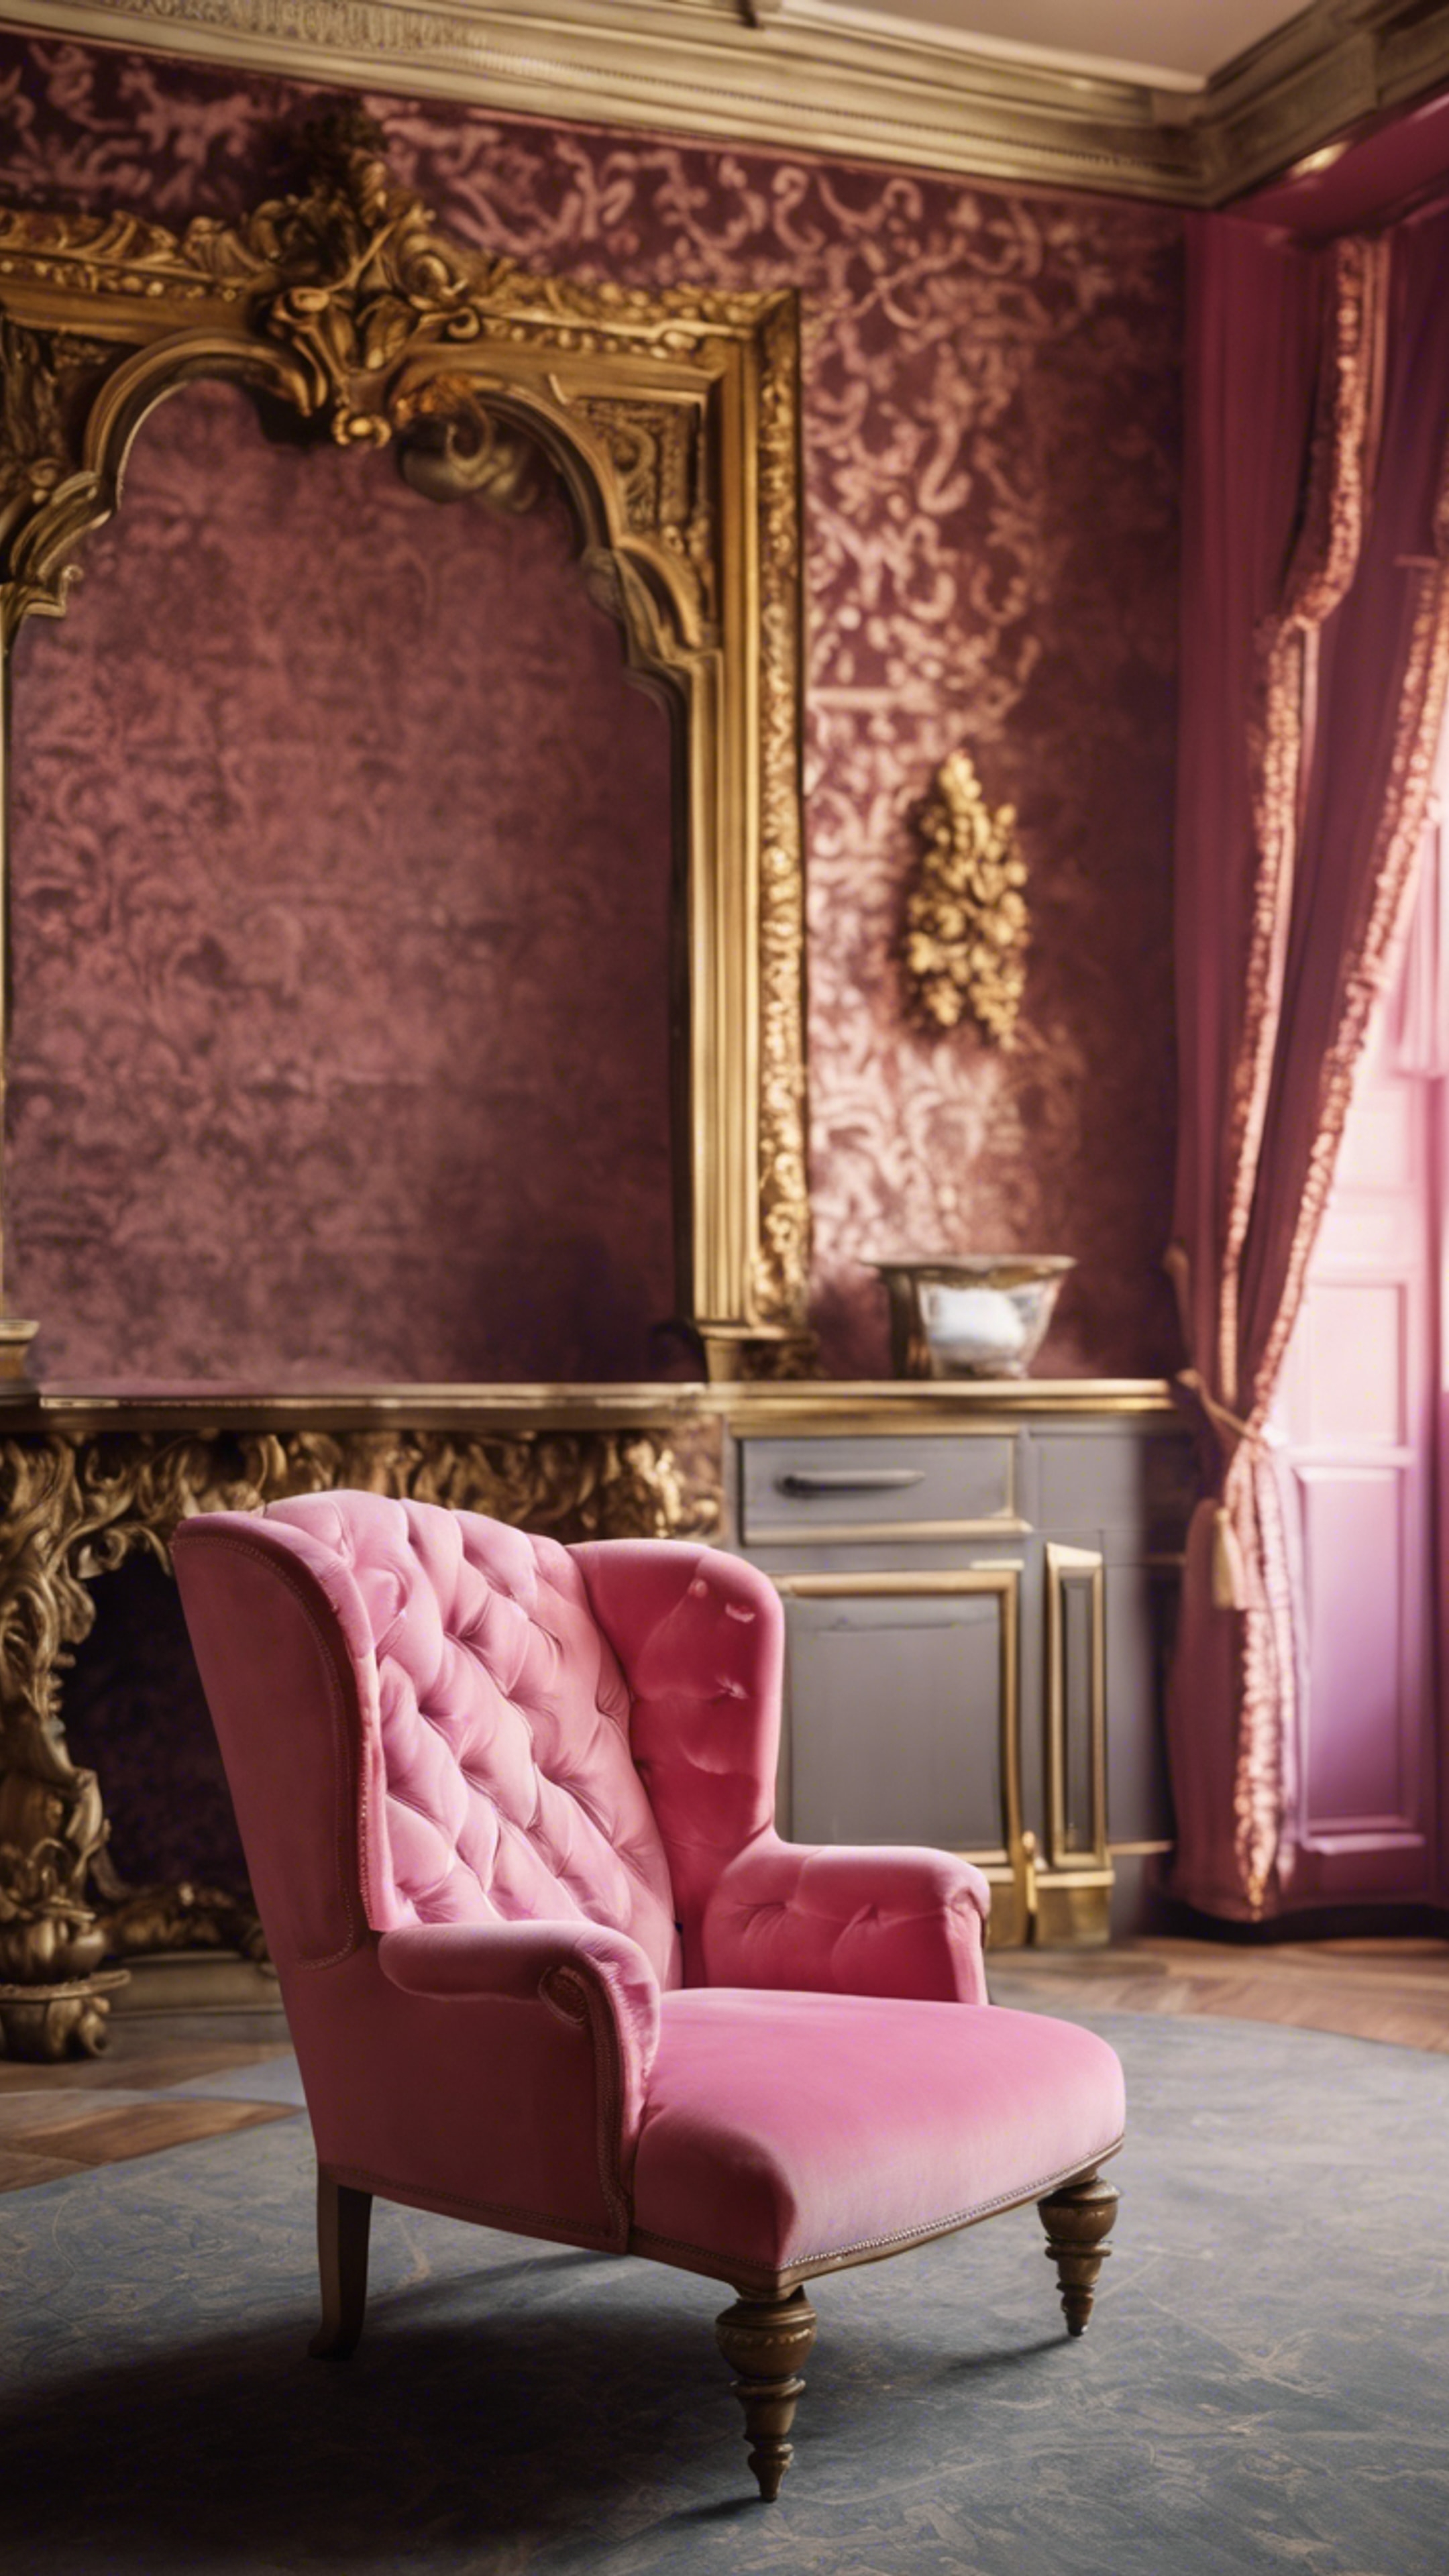 A pink antique velvet armchair set against a gold-leaf patterned wall in a Victorian era room.壁紙[f51172fa36db4600a464]